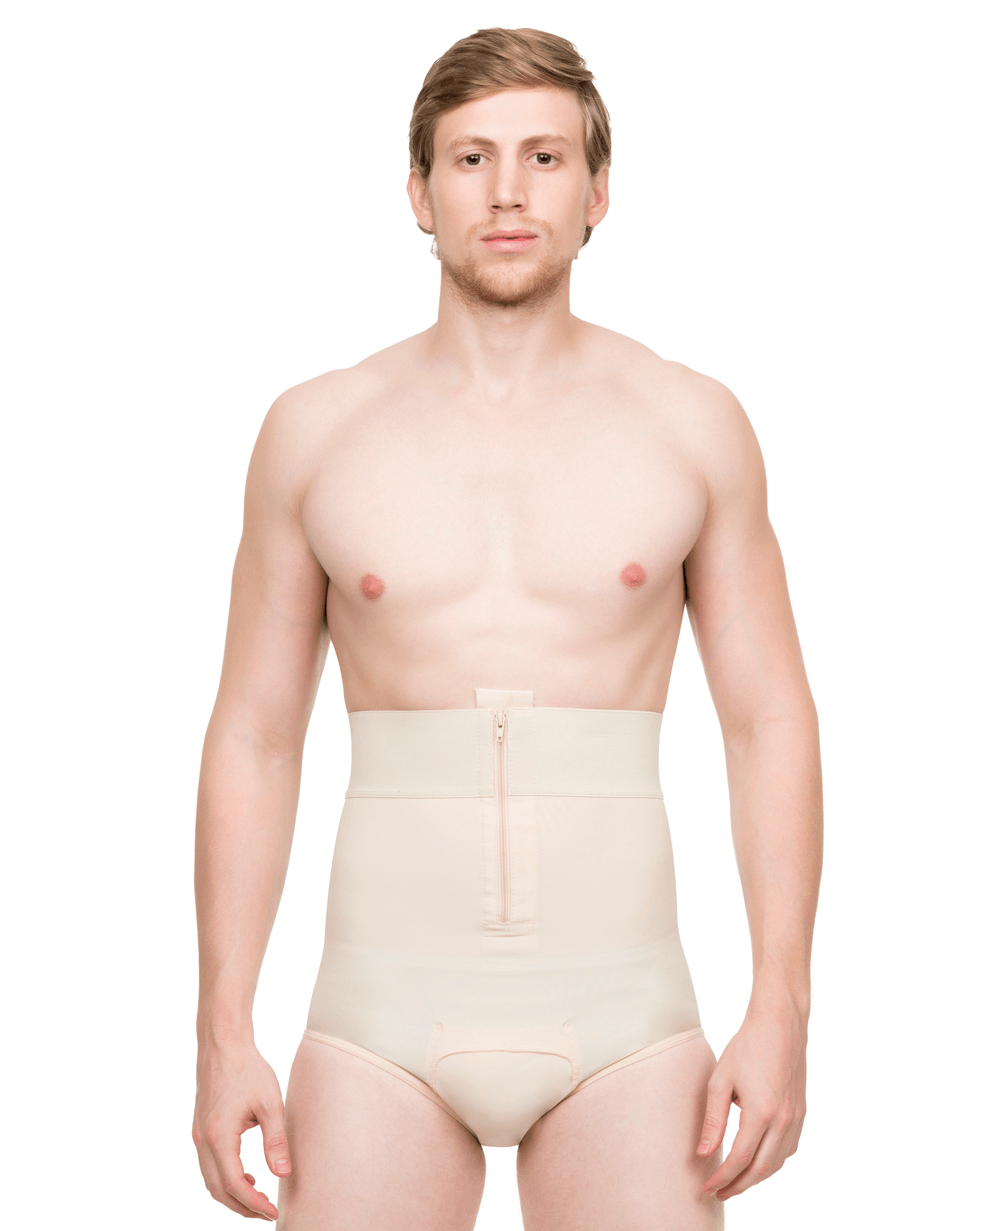 http://isavela.com/cdn/shop/products/Isavela_Compression_Garments_Fajas_PlasticSurgery_RecoveryGarment_bodycontour_postsurgical_support_male_high_waist_abdominal_cosmetic_surgery_compression_brief_with_zippers_mg01_01.png?v=1683248019